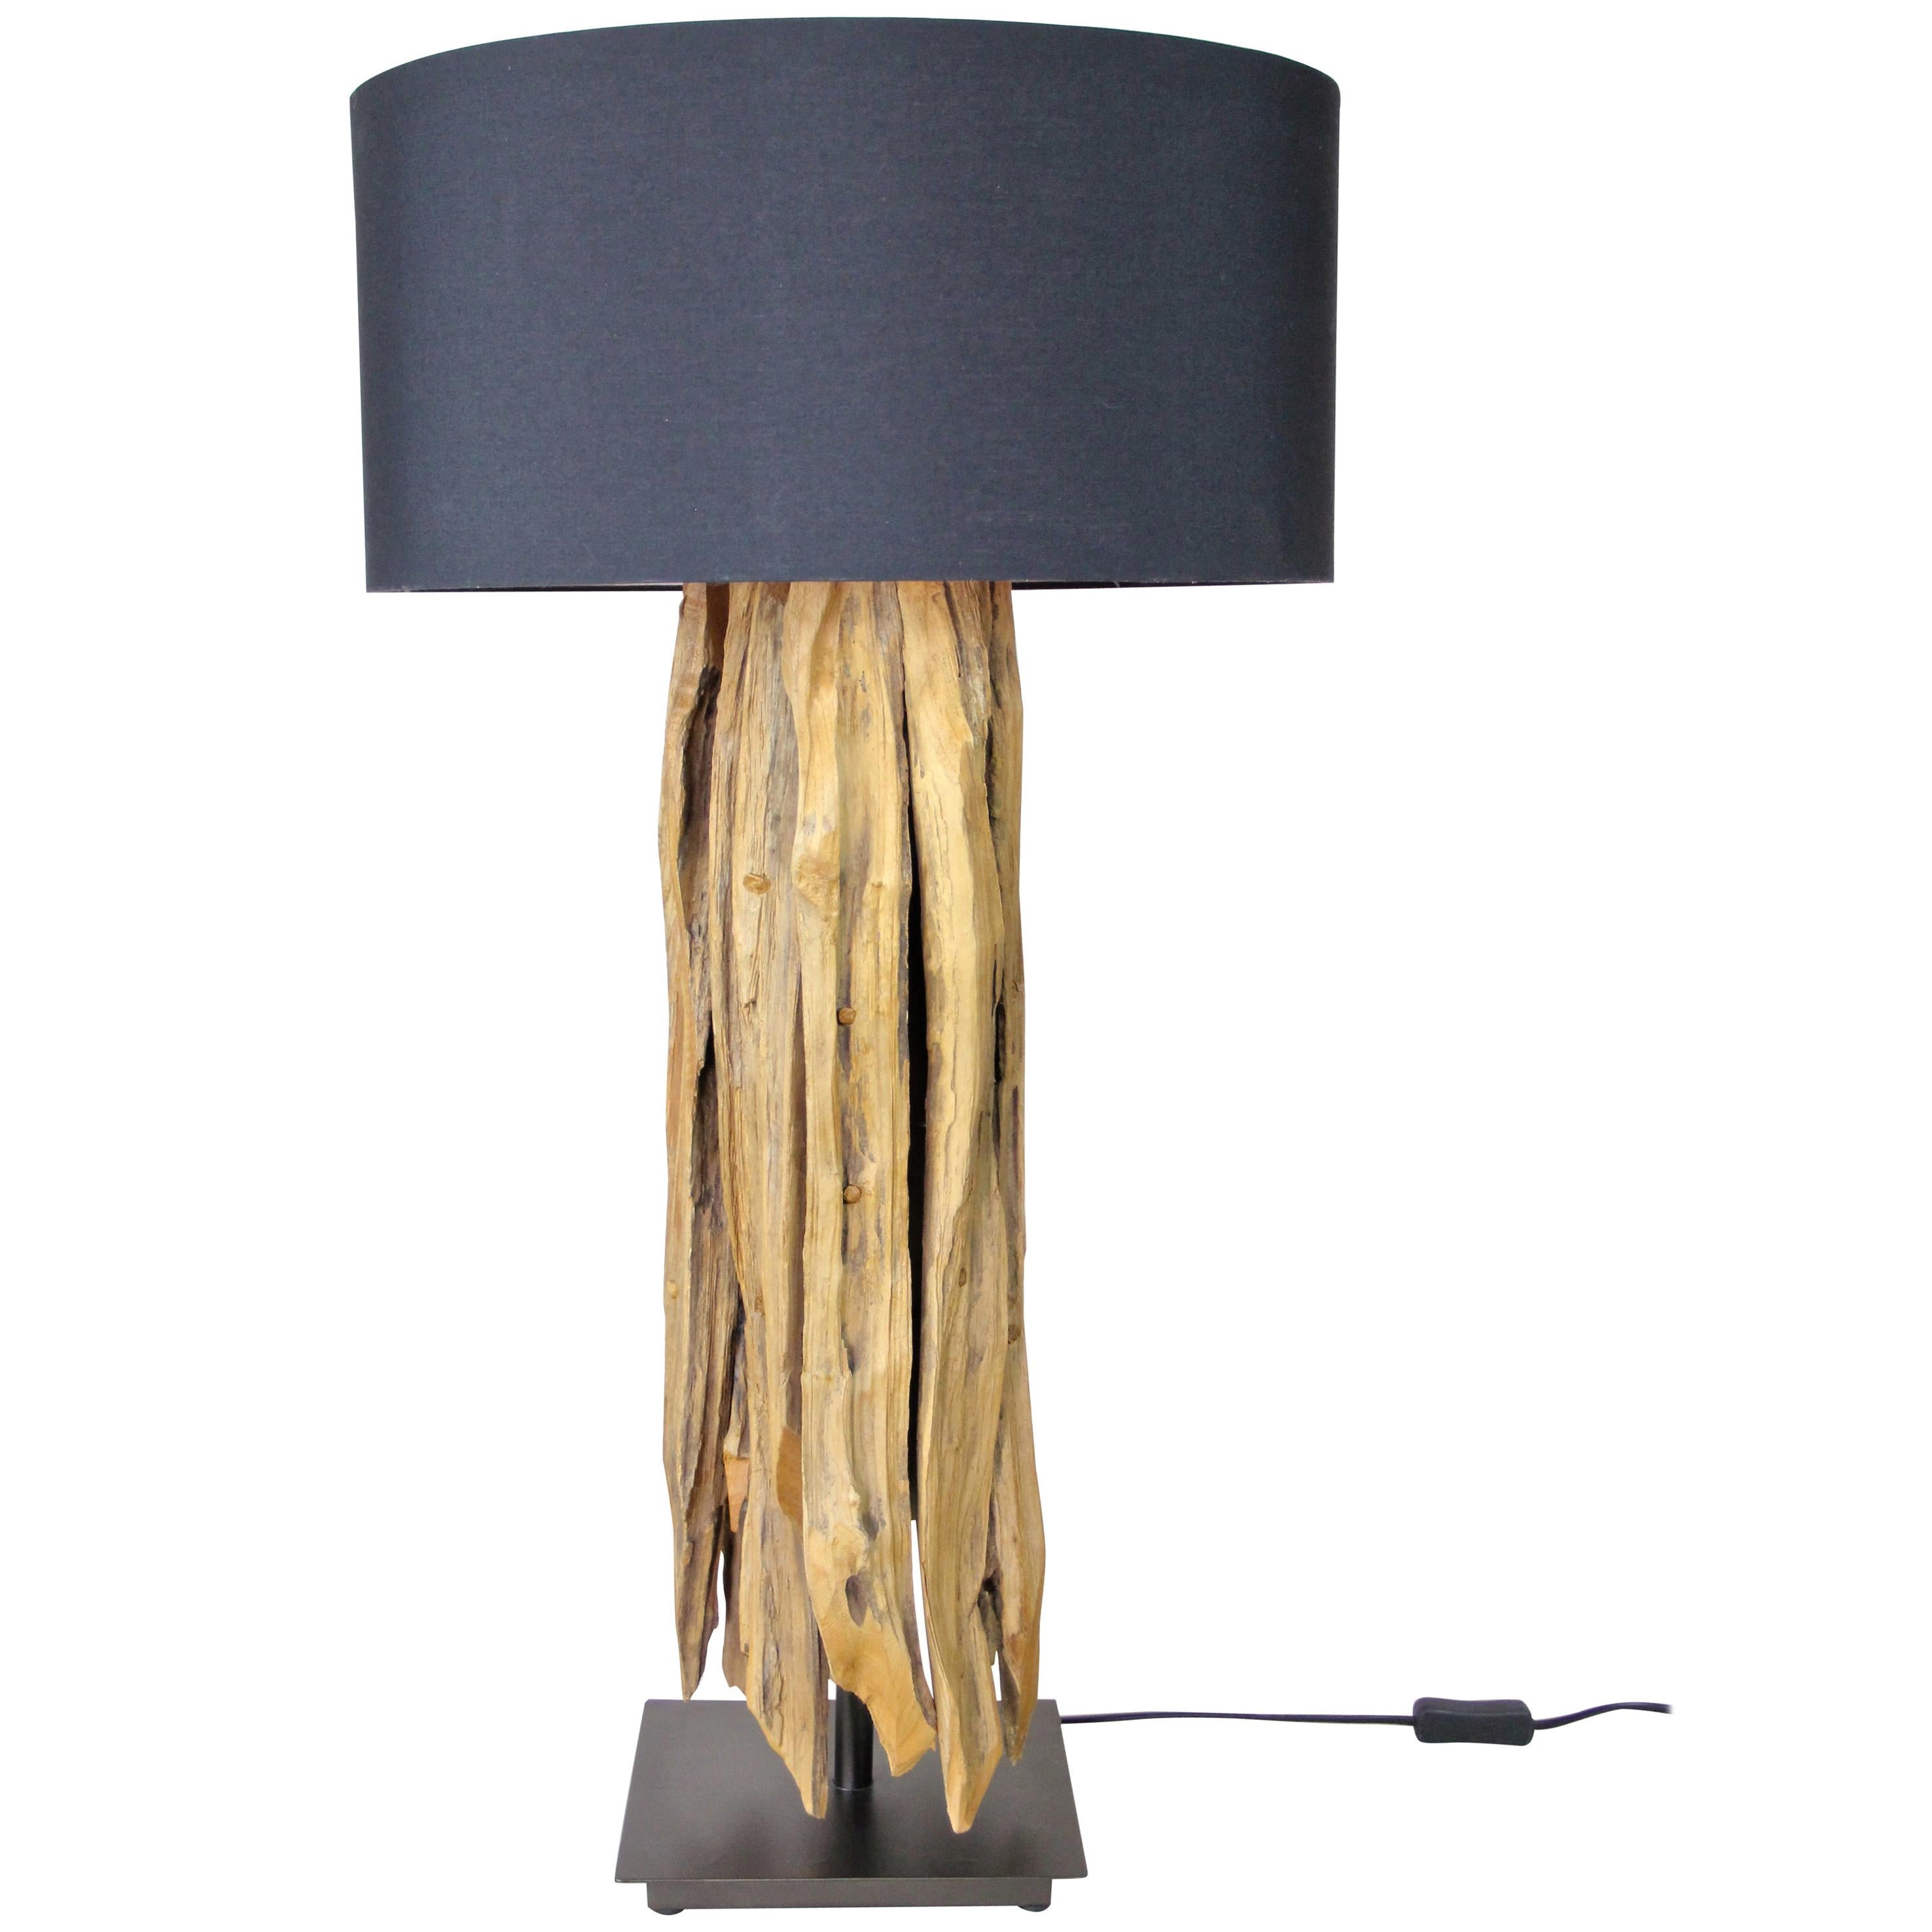 Organic Modern Table Lamp with Old Driftwood and Greyblue Lampshade